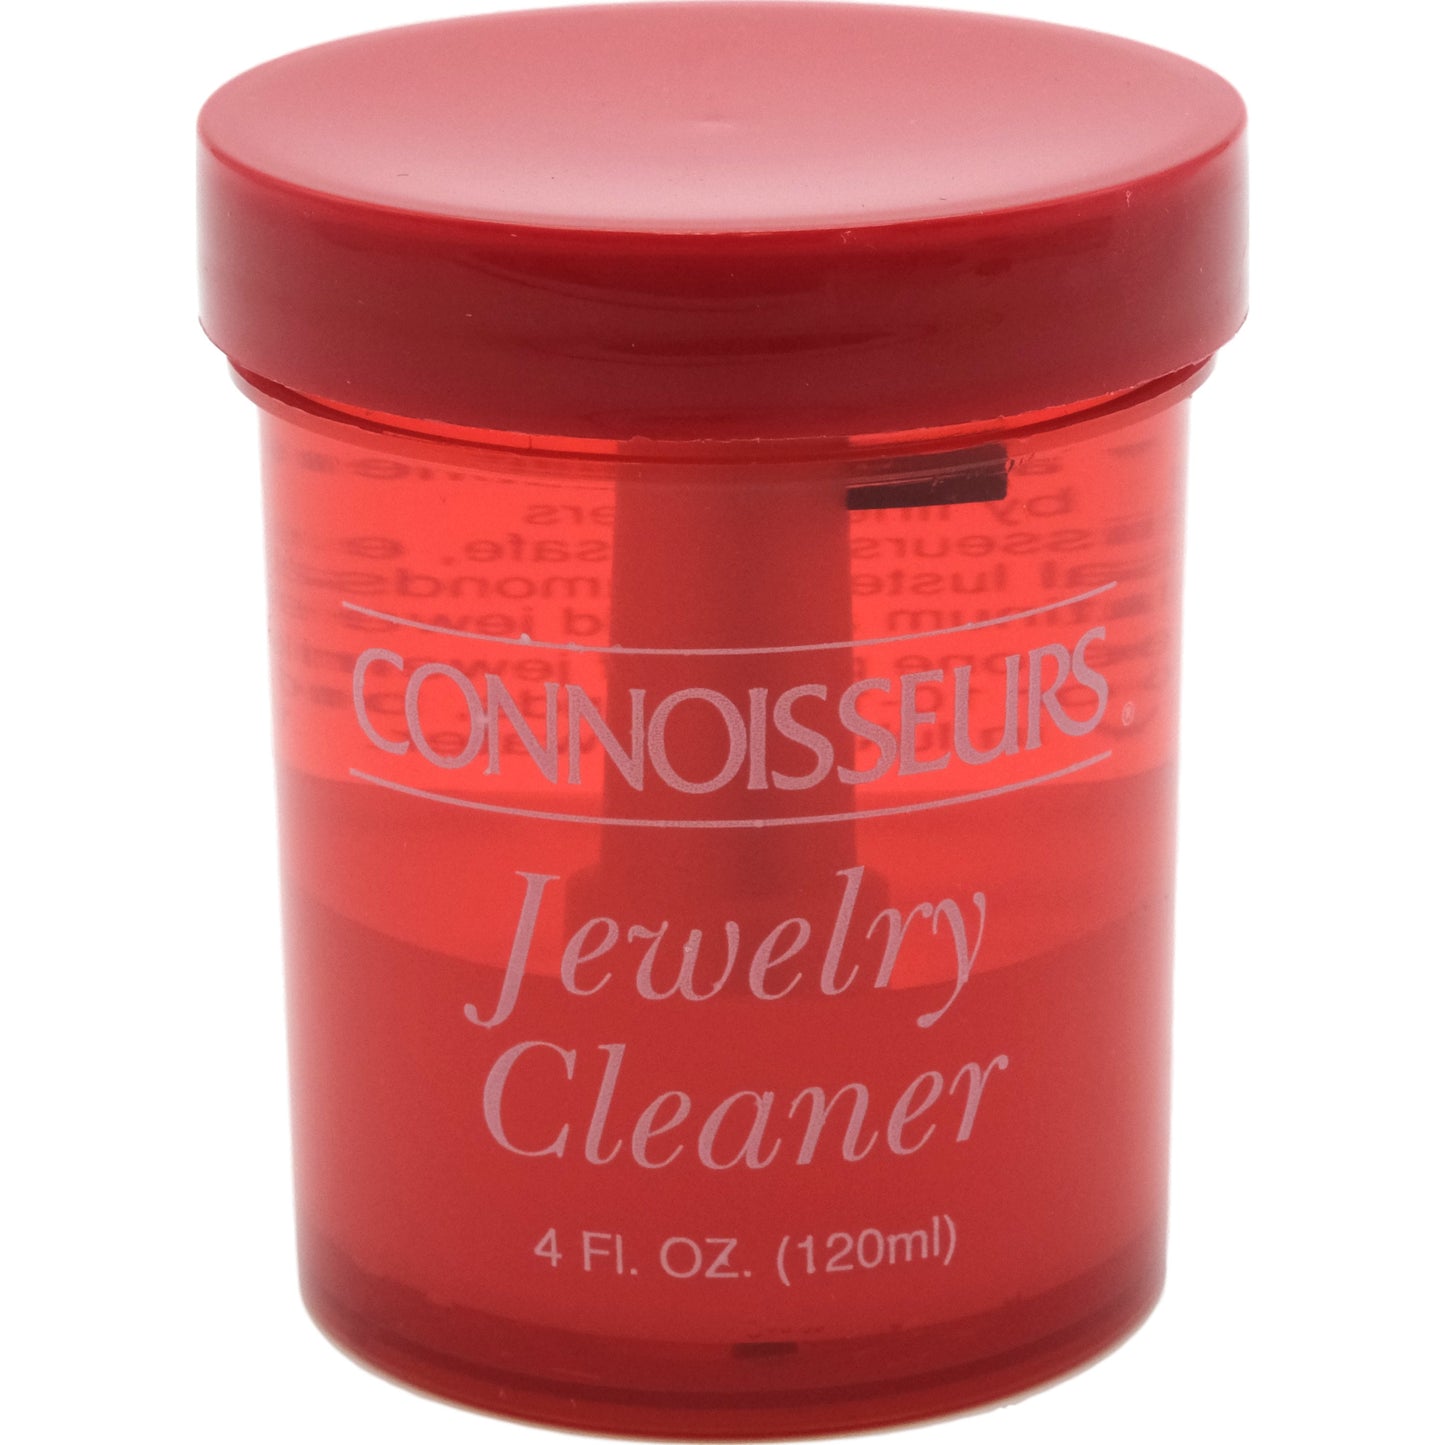 Connoisseurs Jewelry Cleaner 4 fl oz